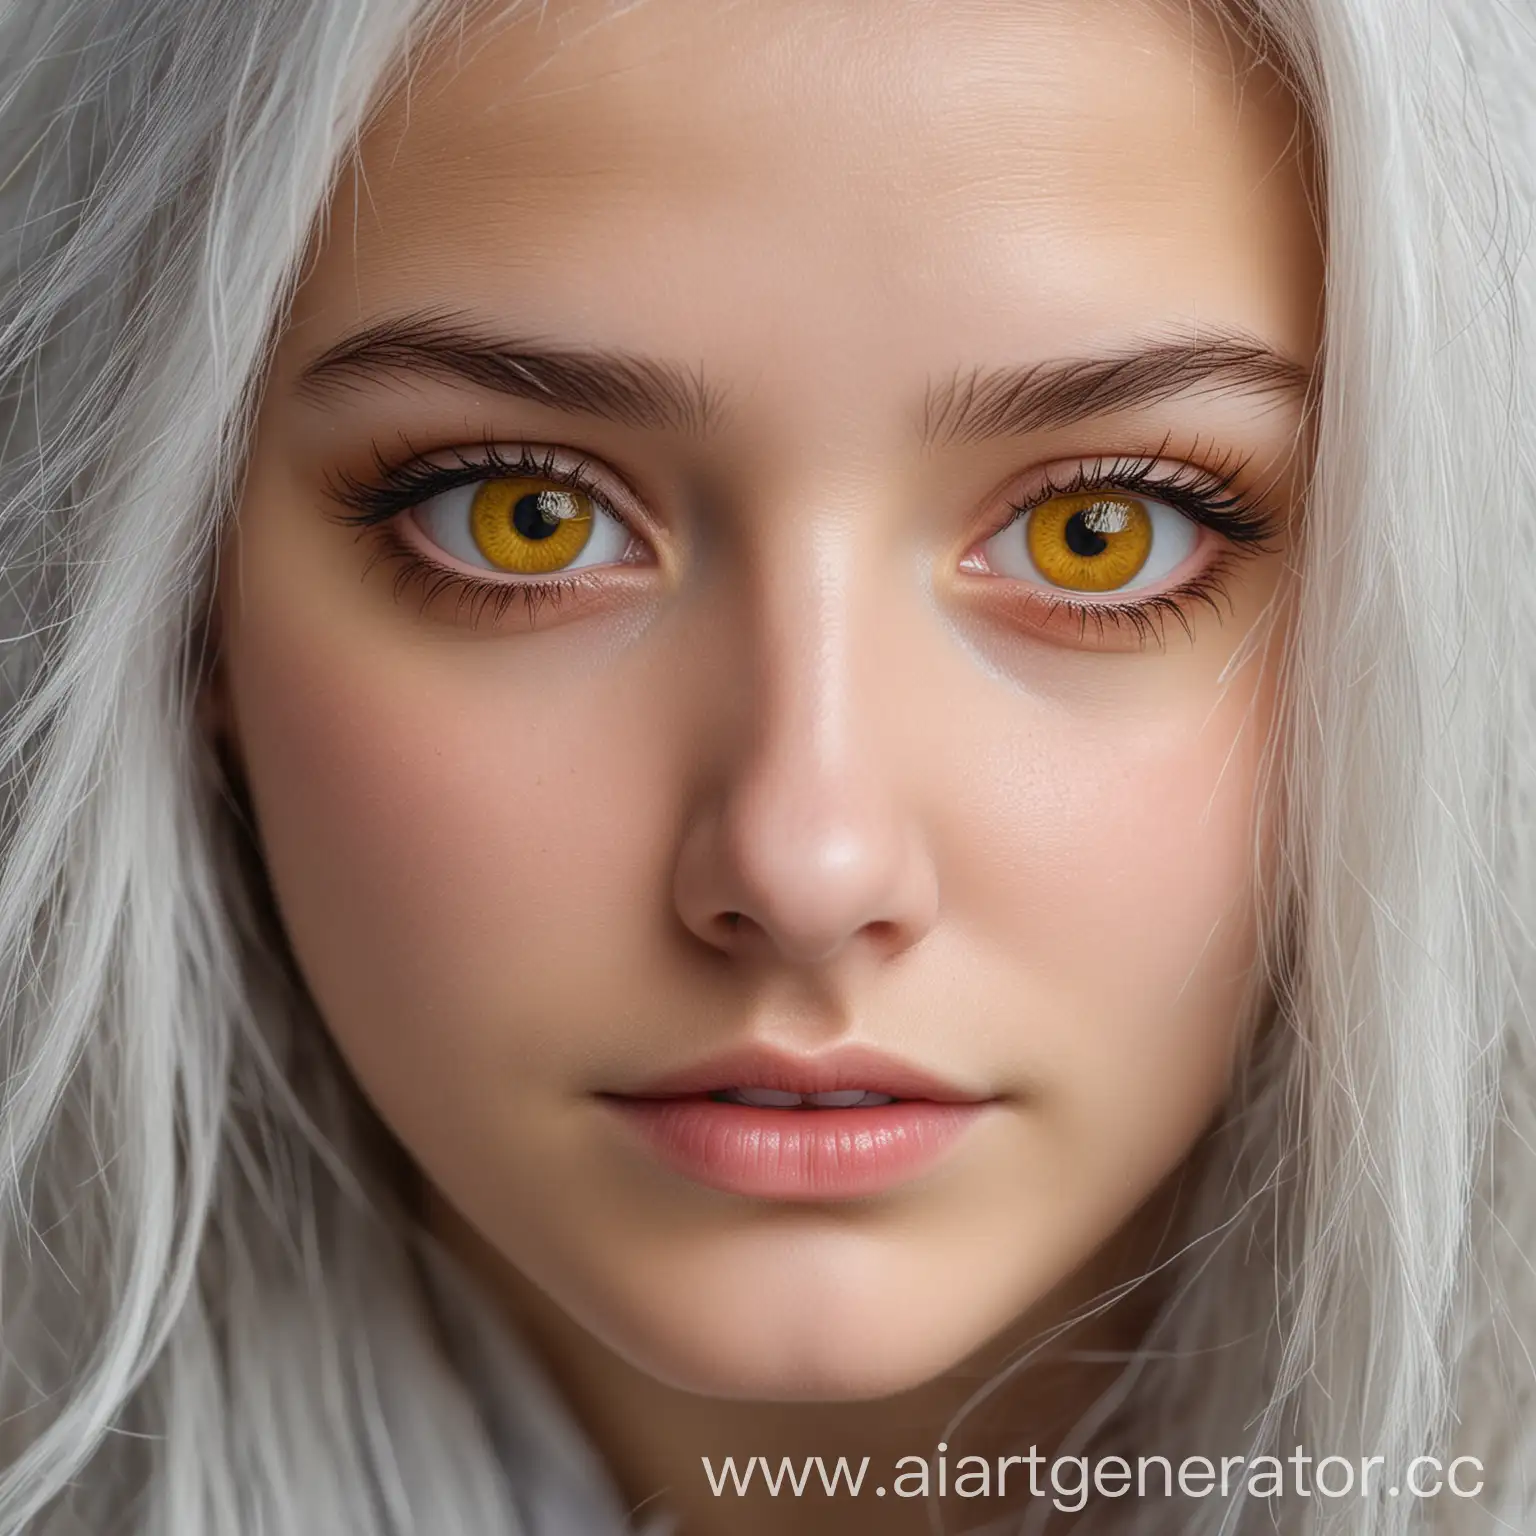 Closeup-Portrait-of-a-Girl-with-White-Hair-and-Yellow-Eyes